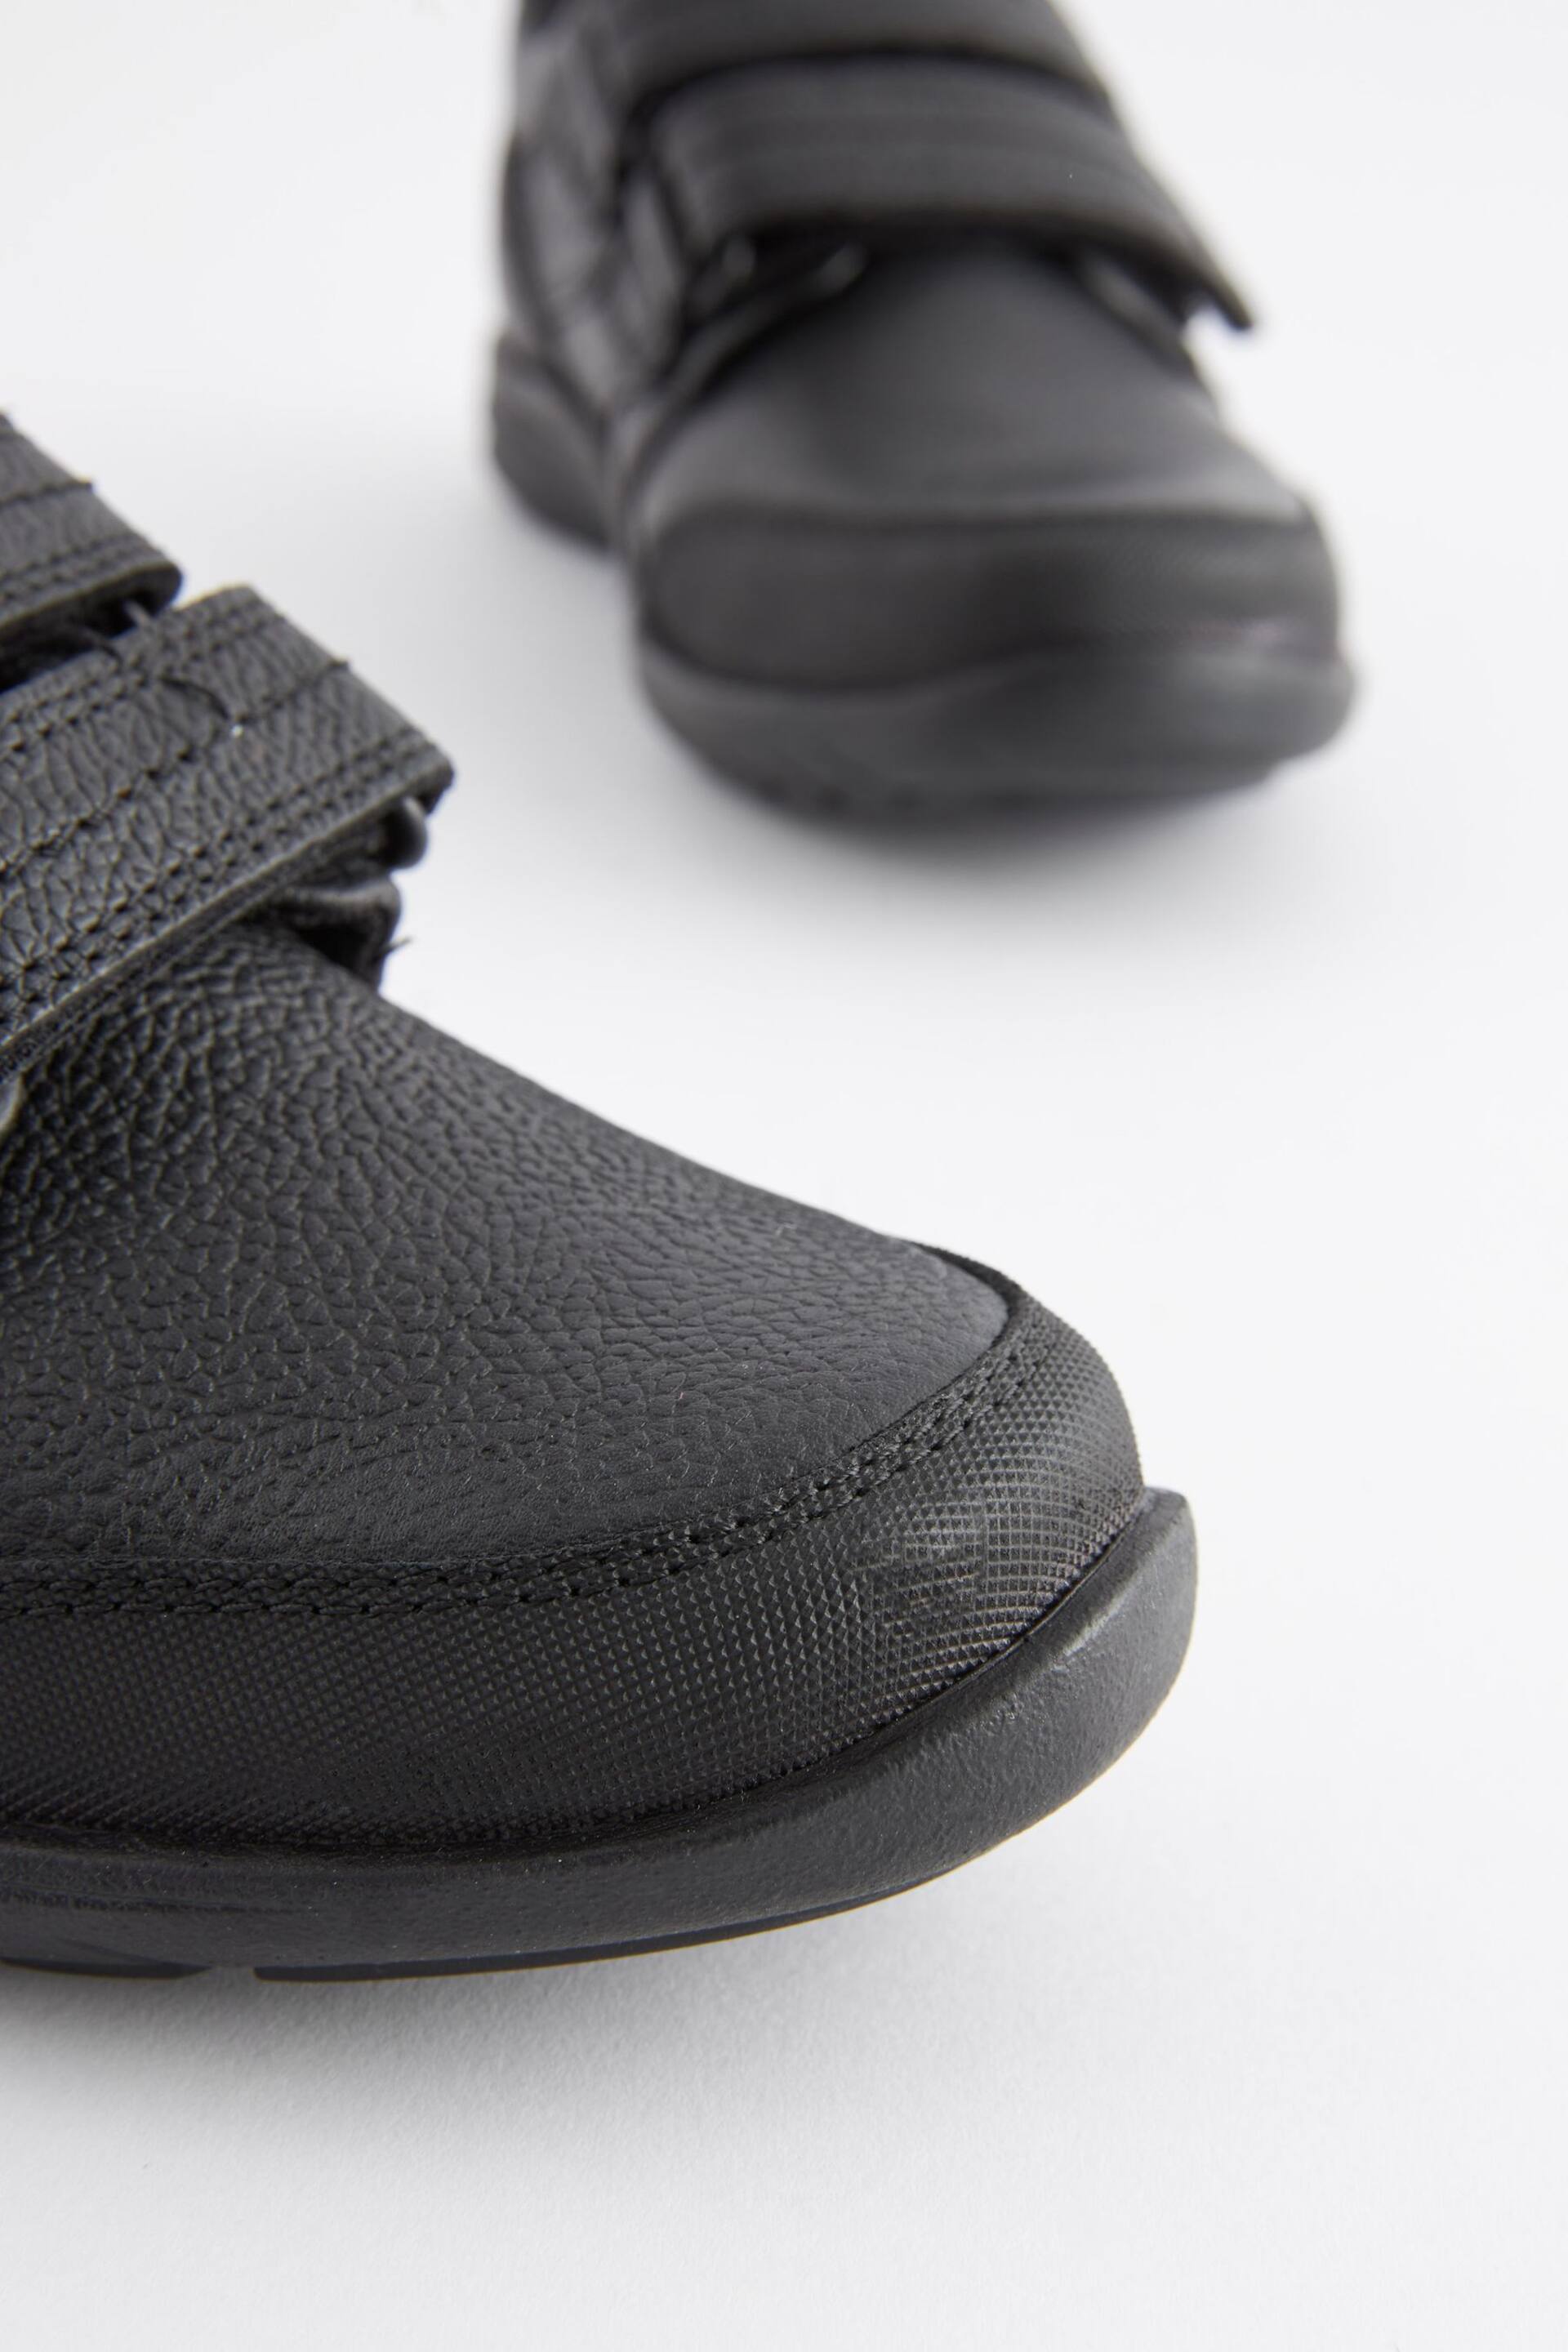 Black Wide Fit (G) School Leather Strap Touch Fasten Shoes - Image 4 of 5